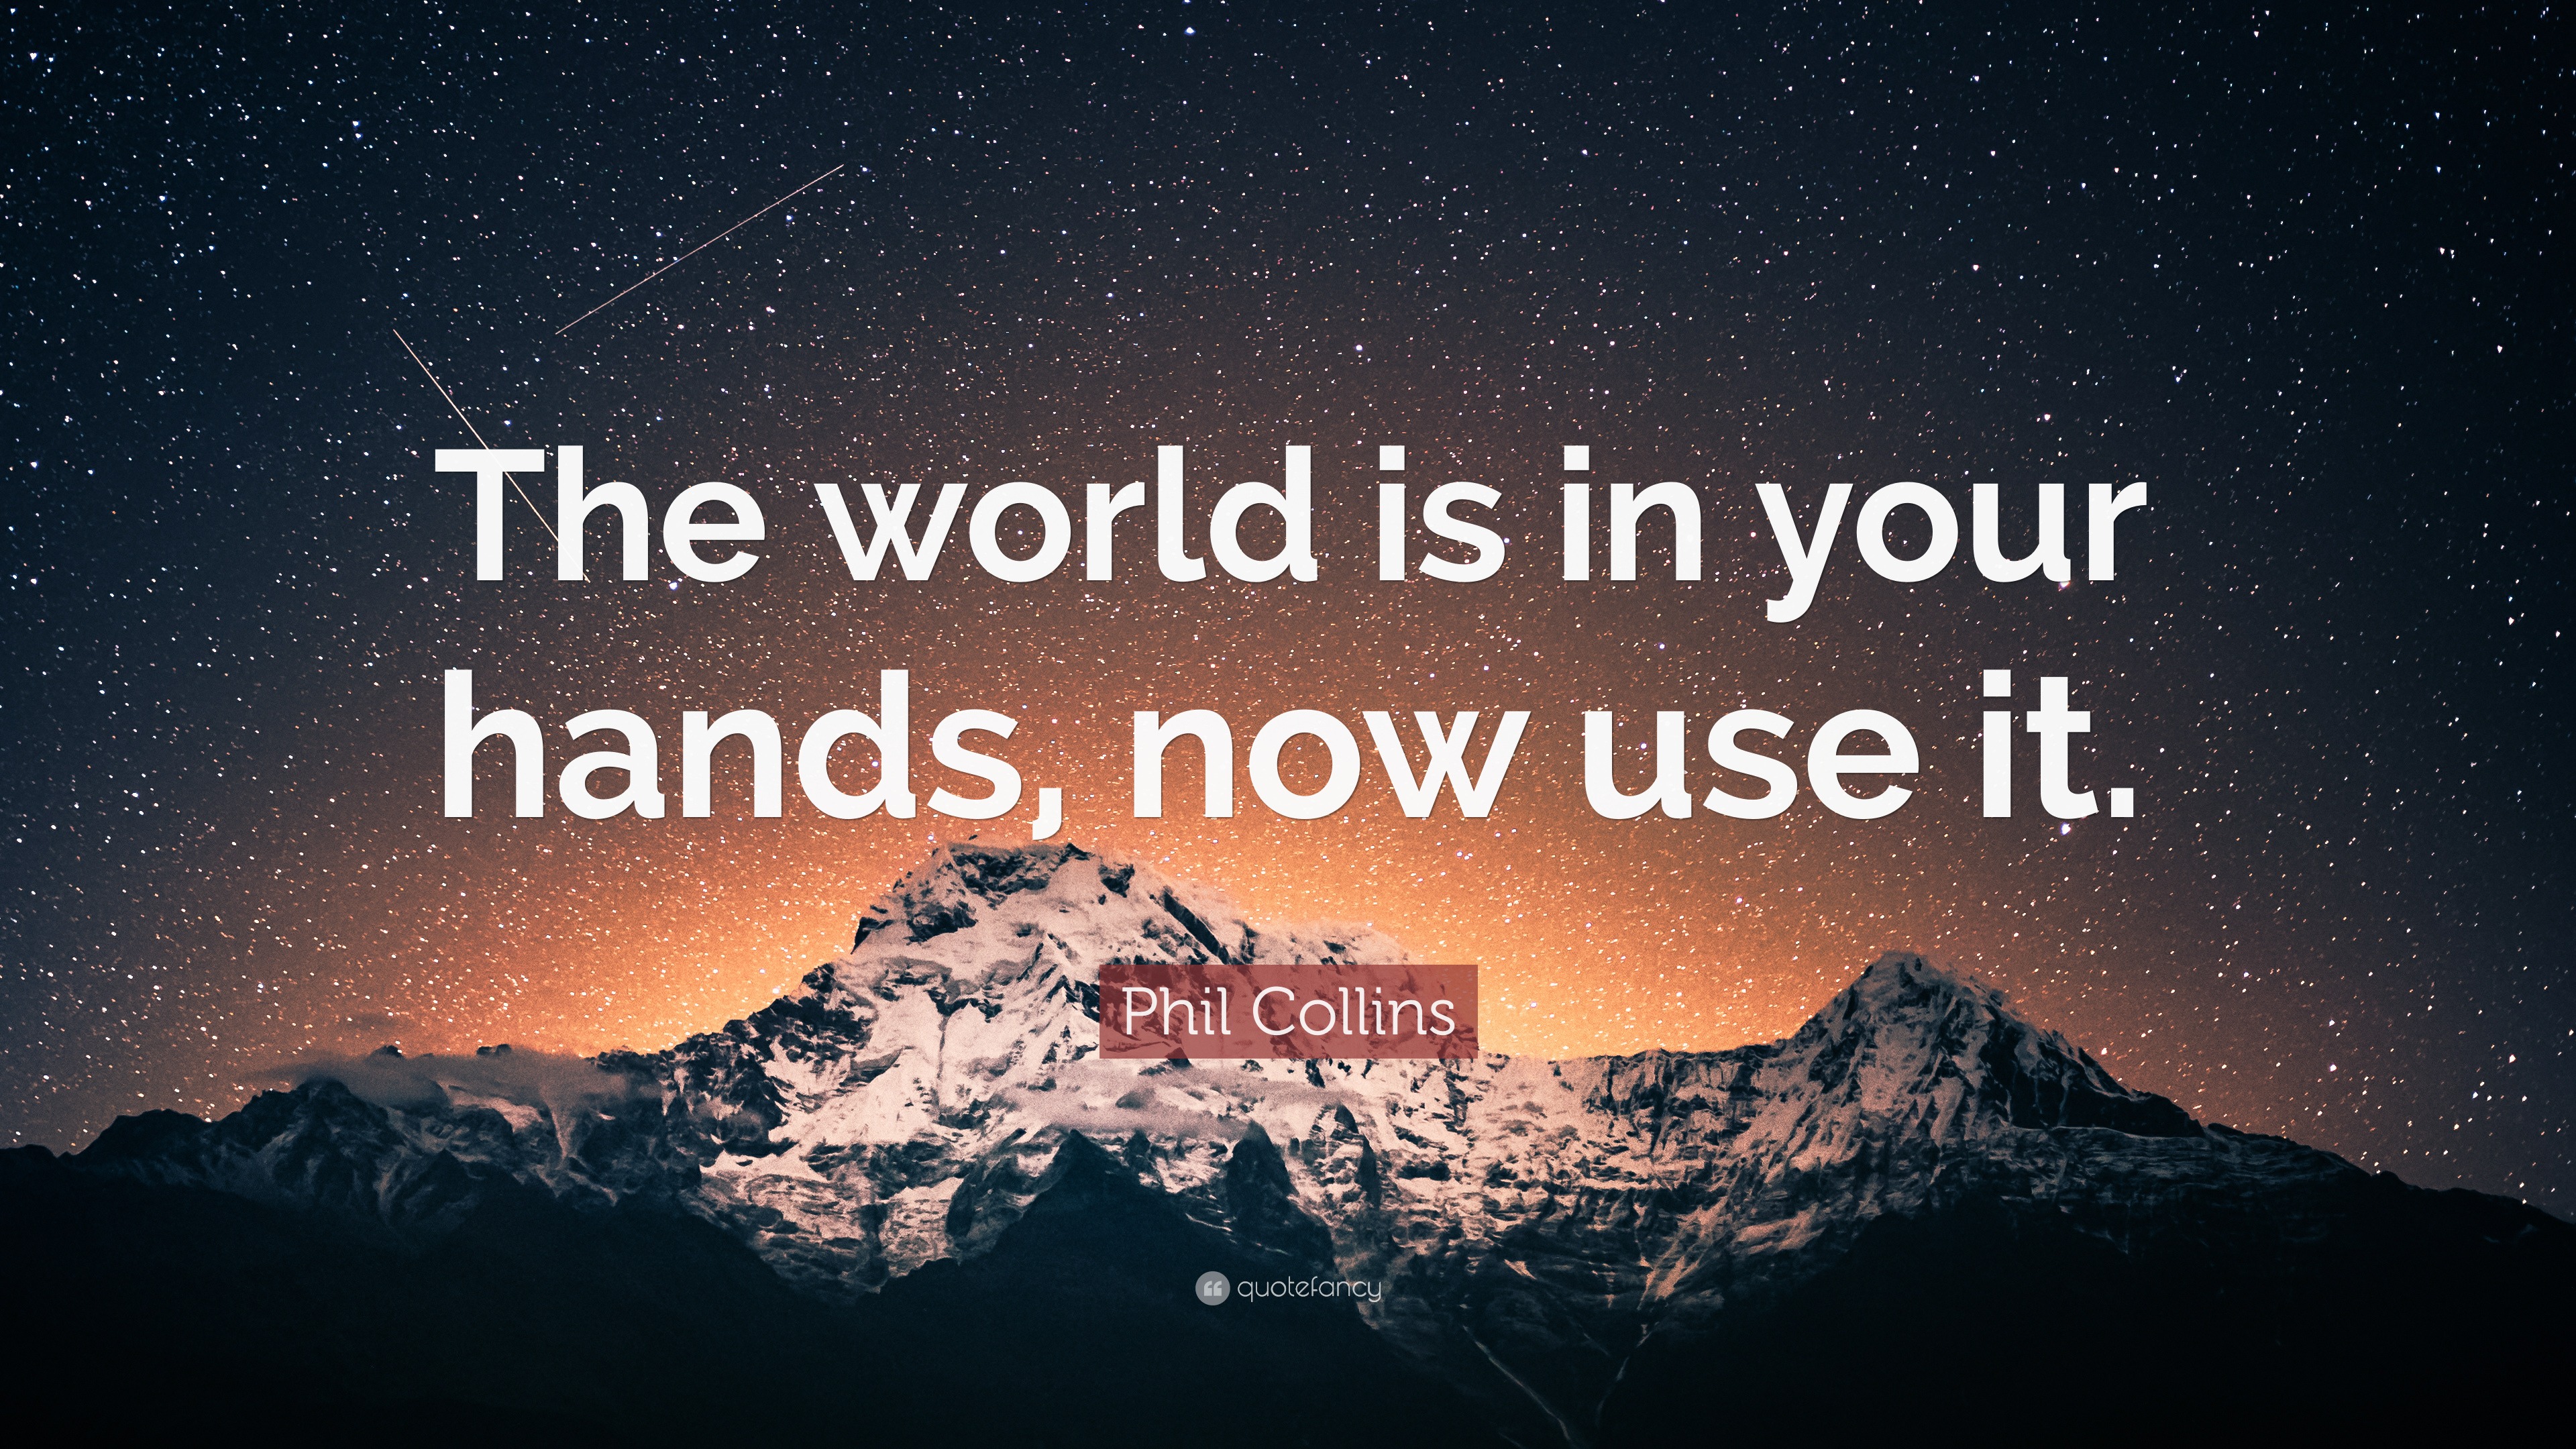 Phil Collins Quote: “The world is in your hands, now use it.”